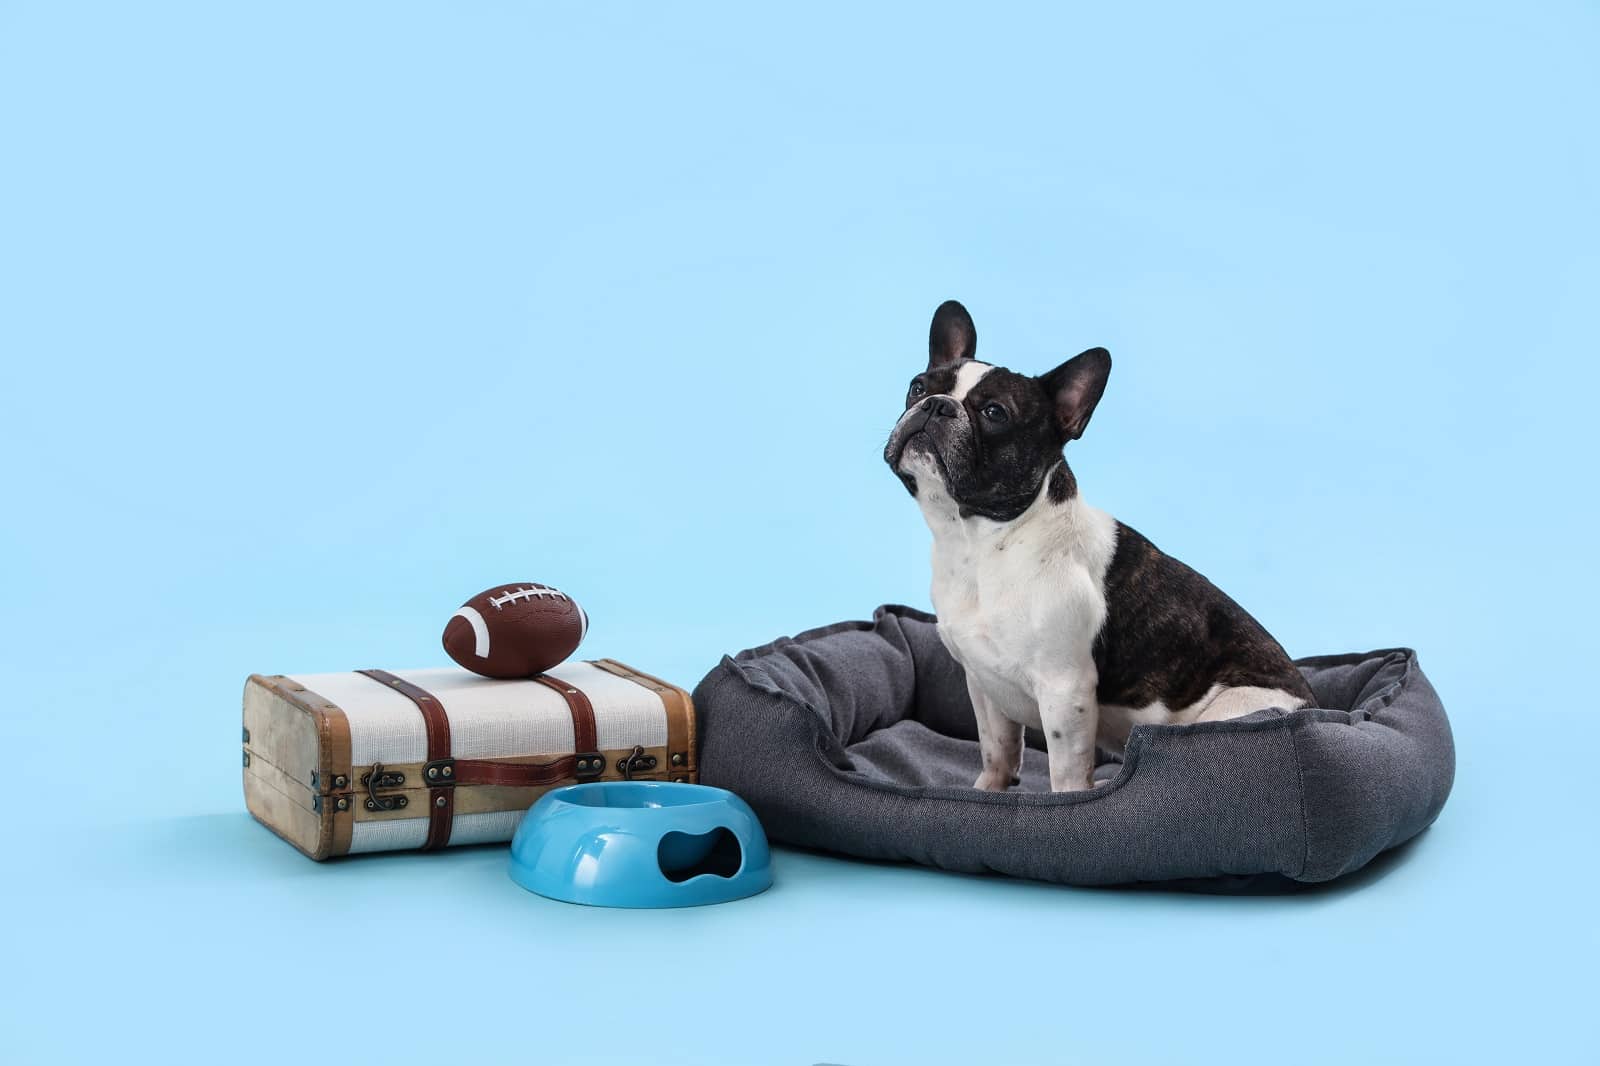 <p><span>Efficient packing is key to a stress-free trip with your pet. Create a checklist of essential items, including food, water, medications, toys, and grooming supplies. Consider the length of your trip and the availability of pet supplies at your destination. Pack items that will keep your pet comfortable and entertained, especially during long travel days.</span></p> <p><b>Insider’s Tip: </b><span>Bring a collapsible water bowl and portable pet bed for your travels.</span></p>